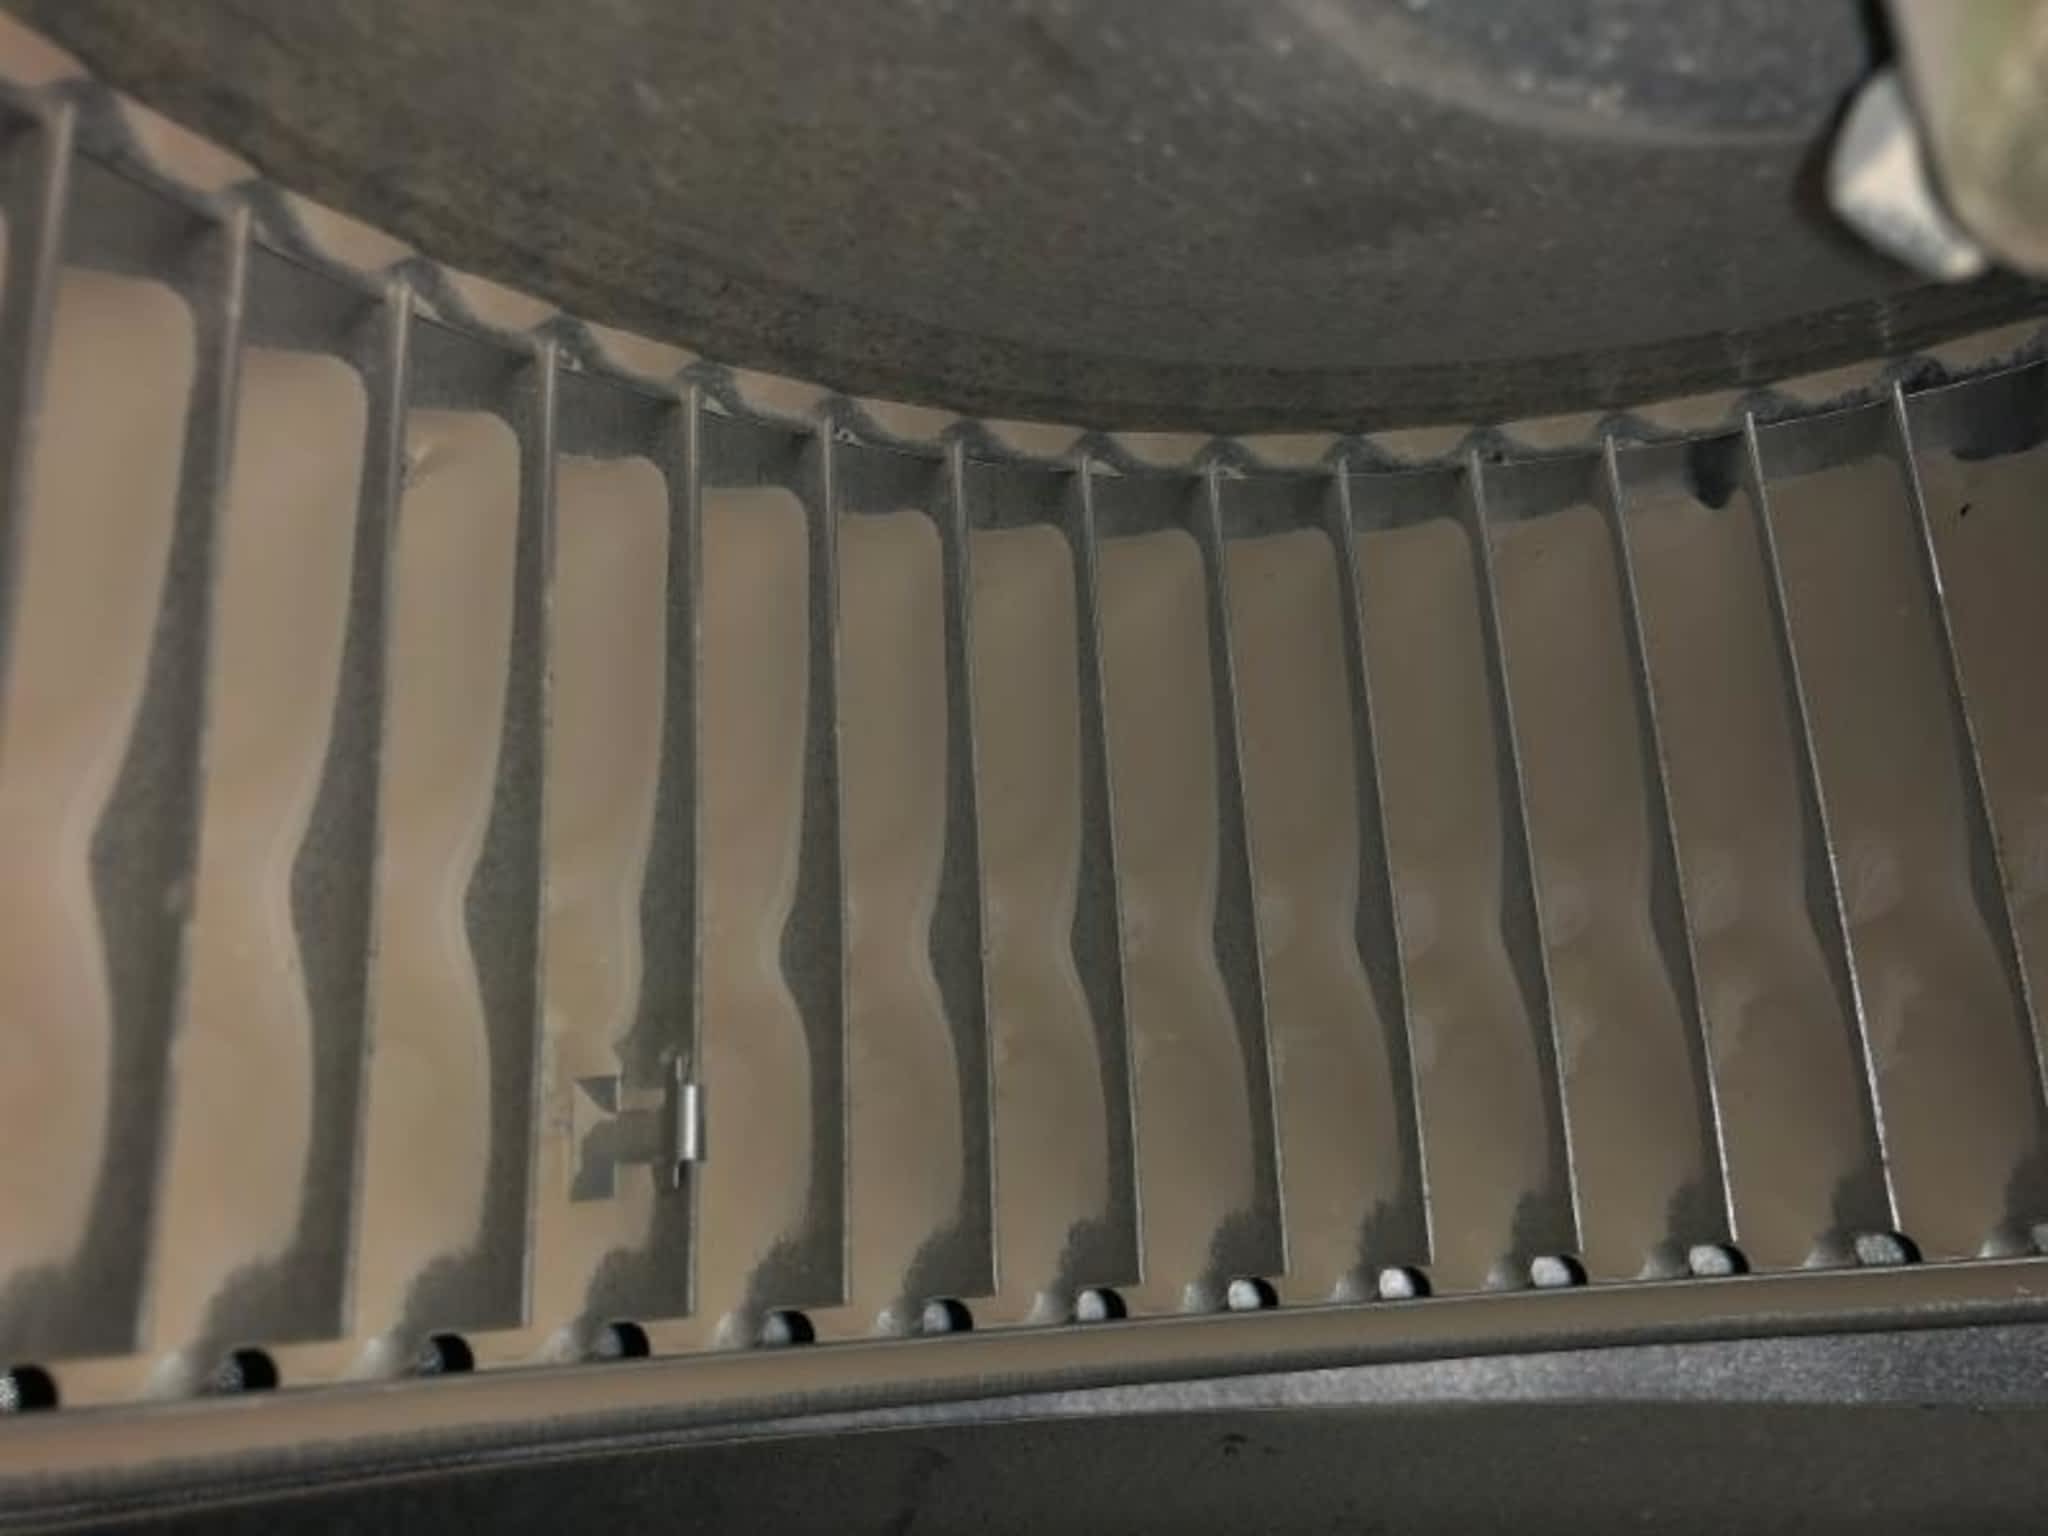 photo SM Duct Cleaning - Mississauga